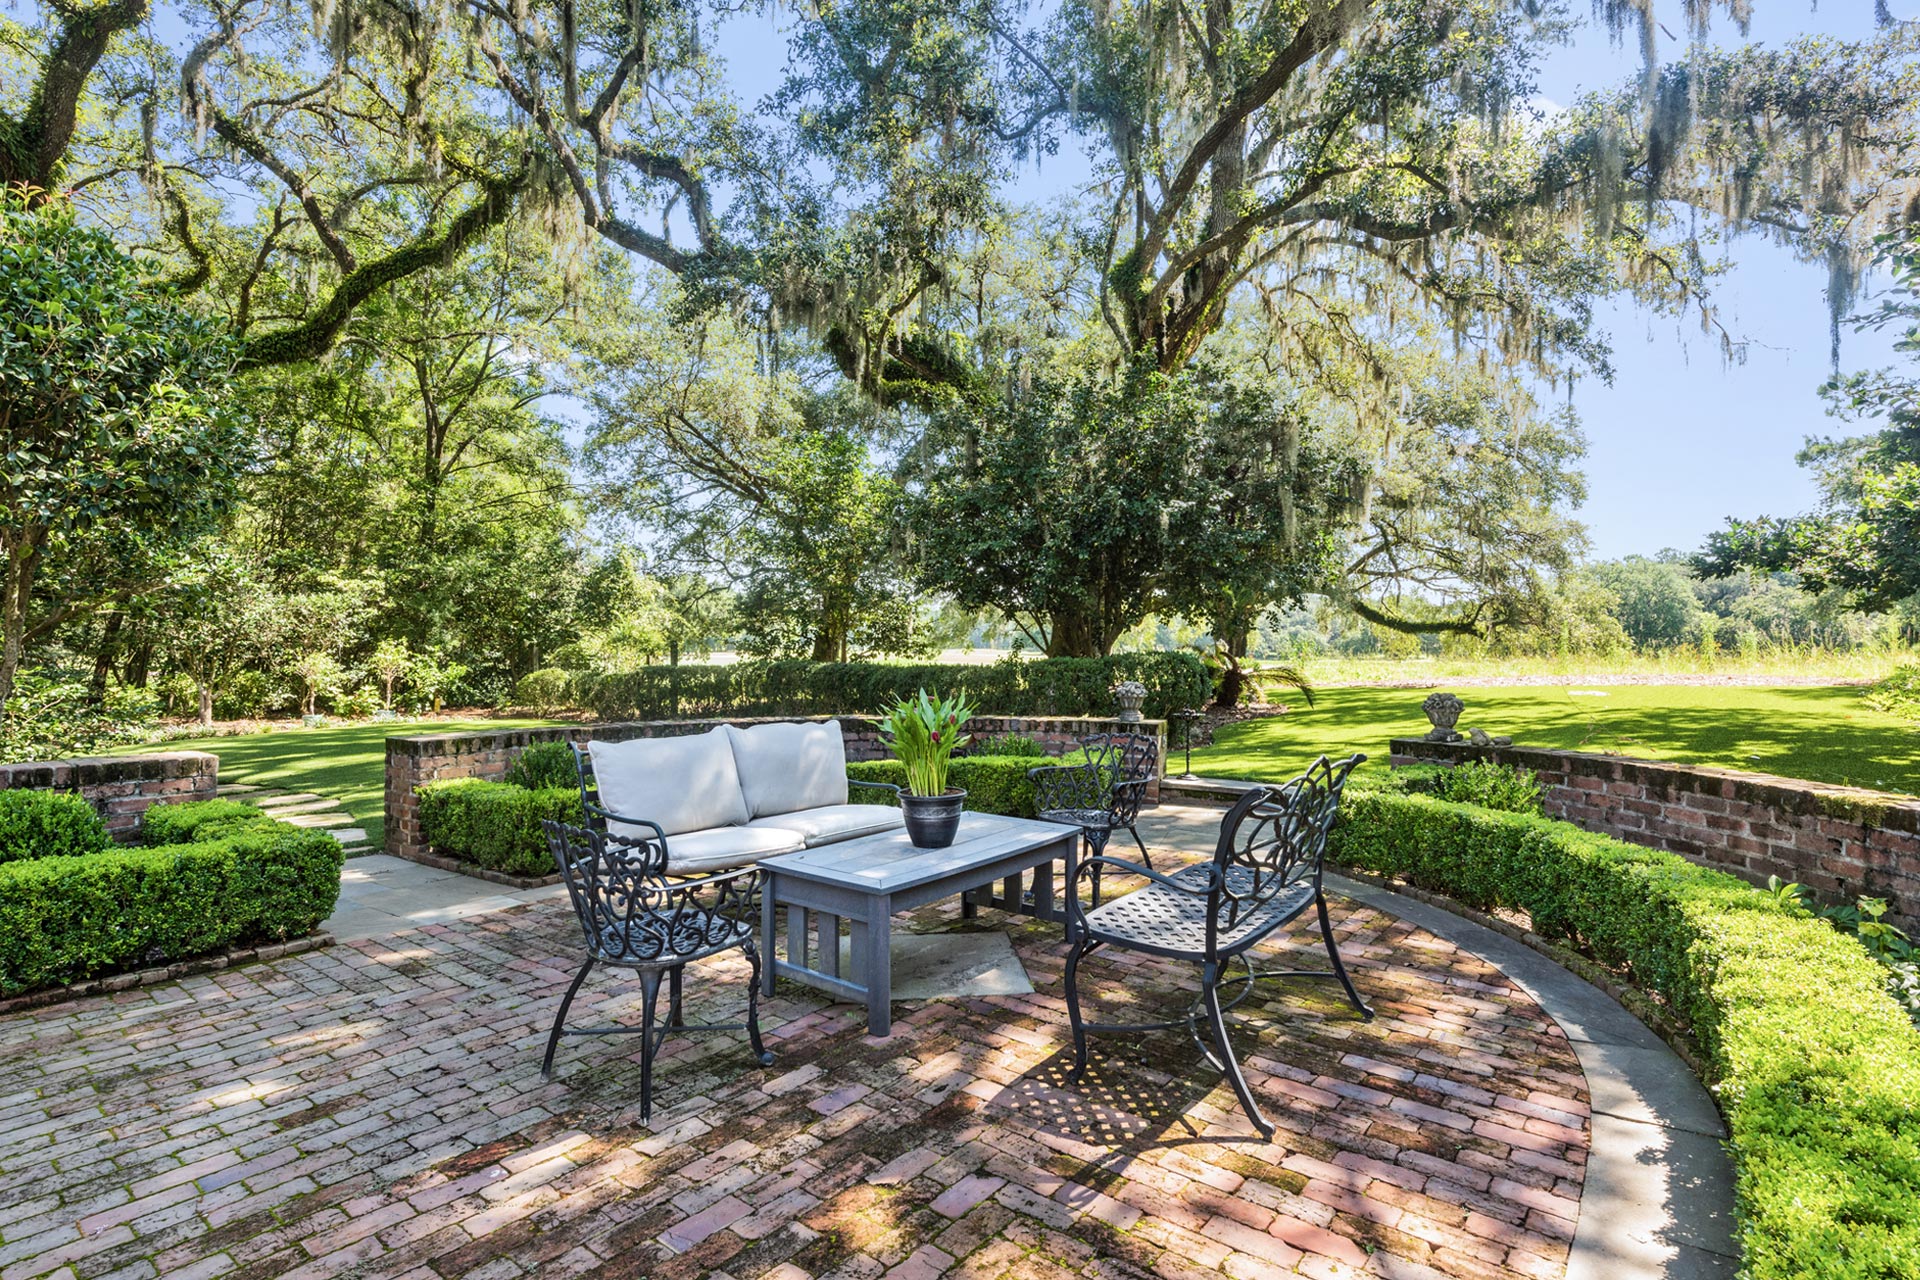 Brick patio in garden for outdoor seating on the South Carolina live oaks